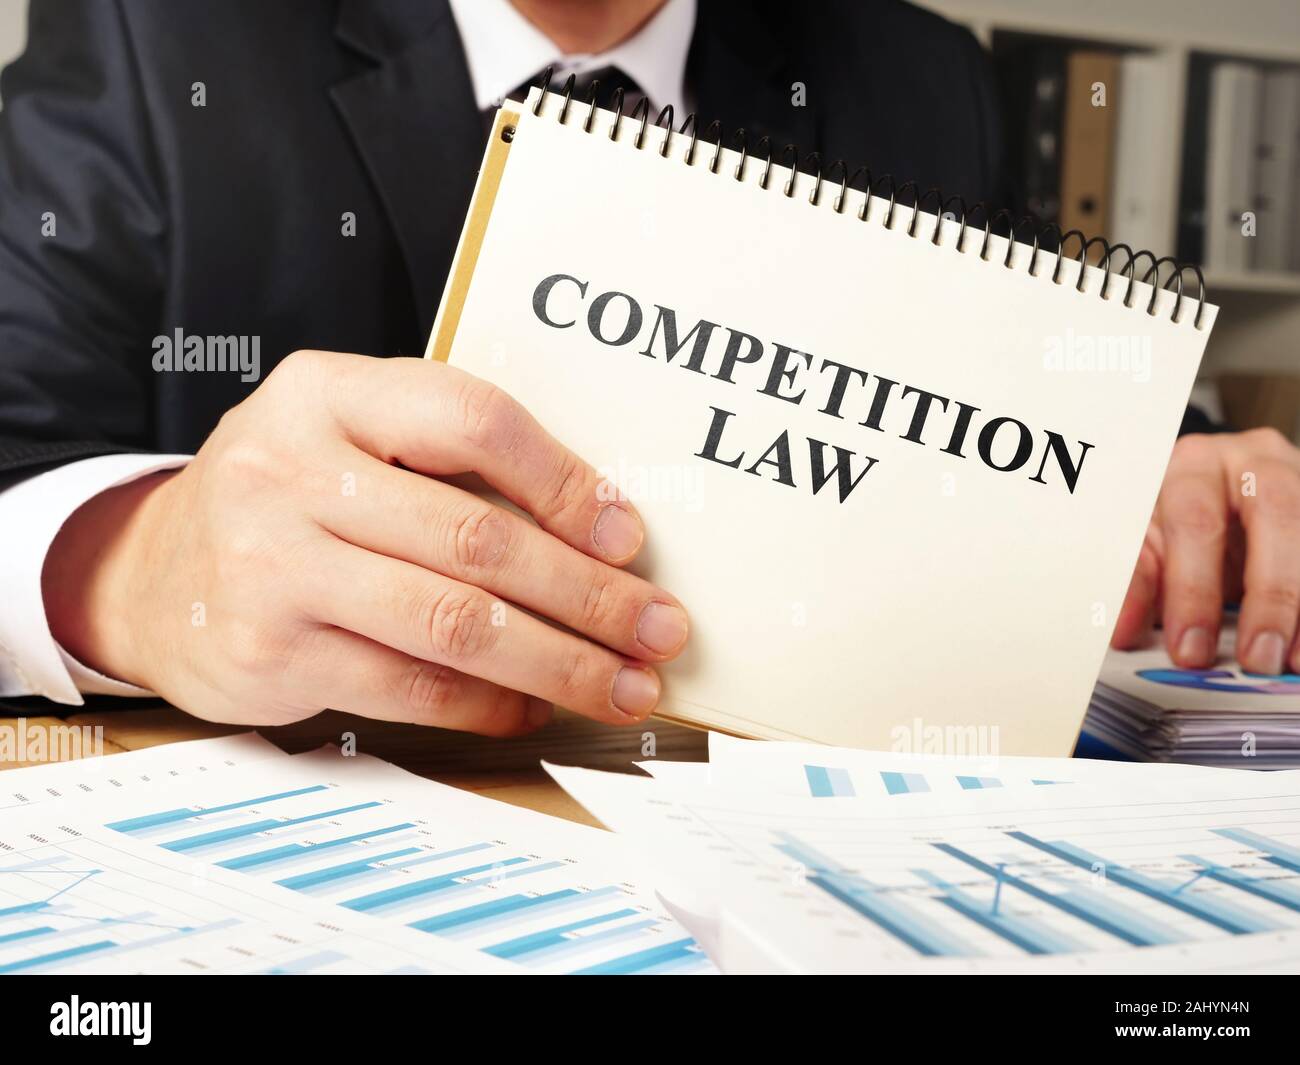 Lawyer is holding competition law book. Stock Photo